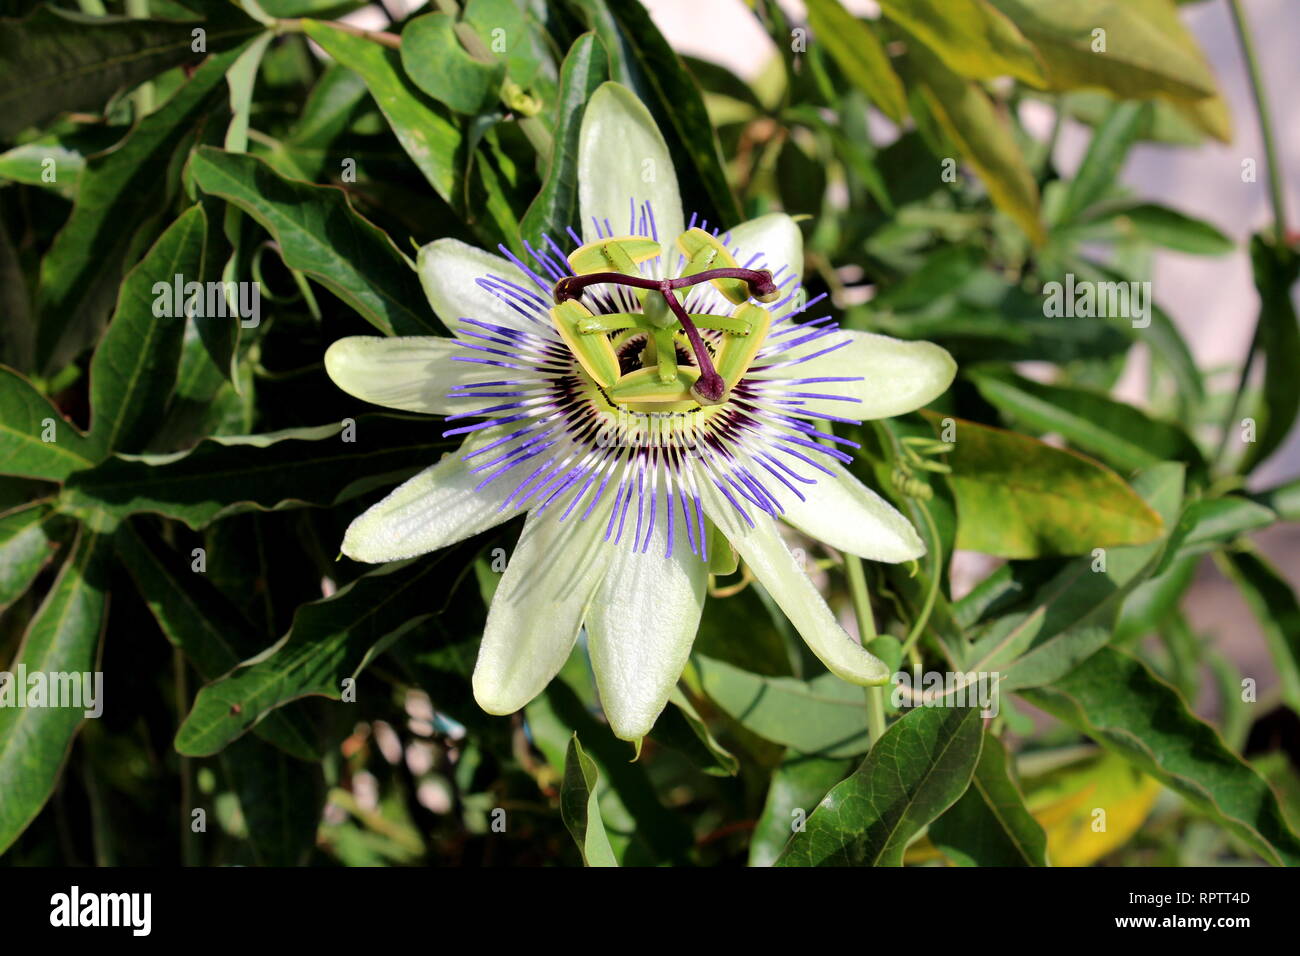 Fully open blooming beautiful unusual Passion fruit or Passiflora edulis or Maracuja or Parcha or Grenadille or Fruit de la passion flower Stock Photo